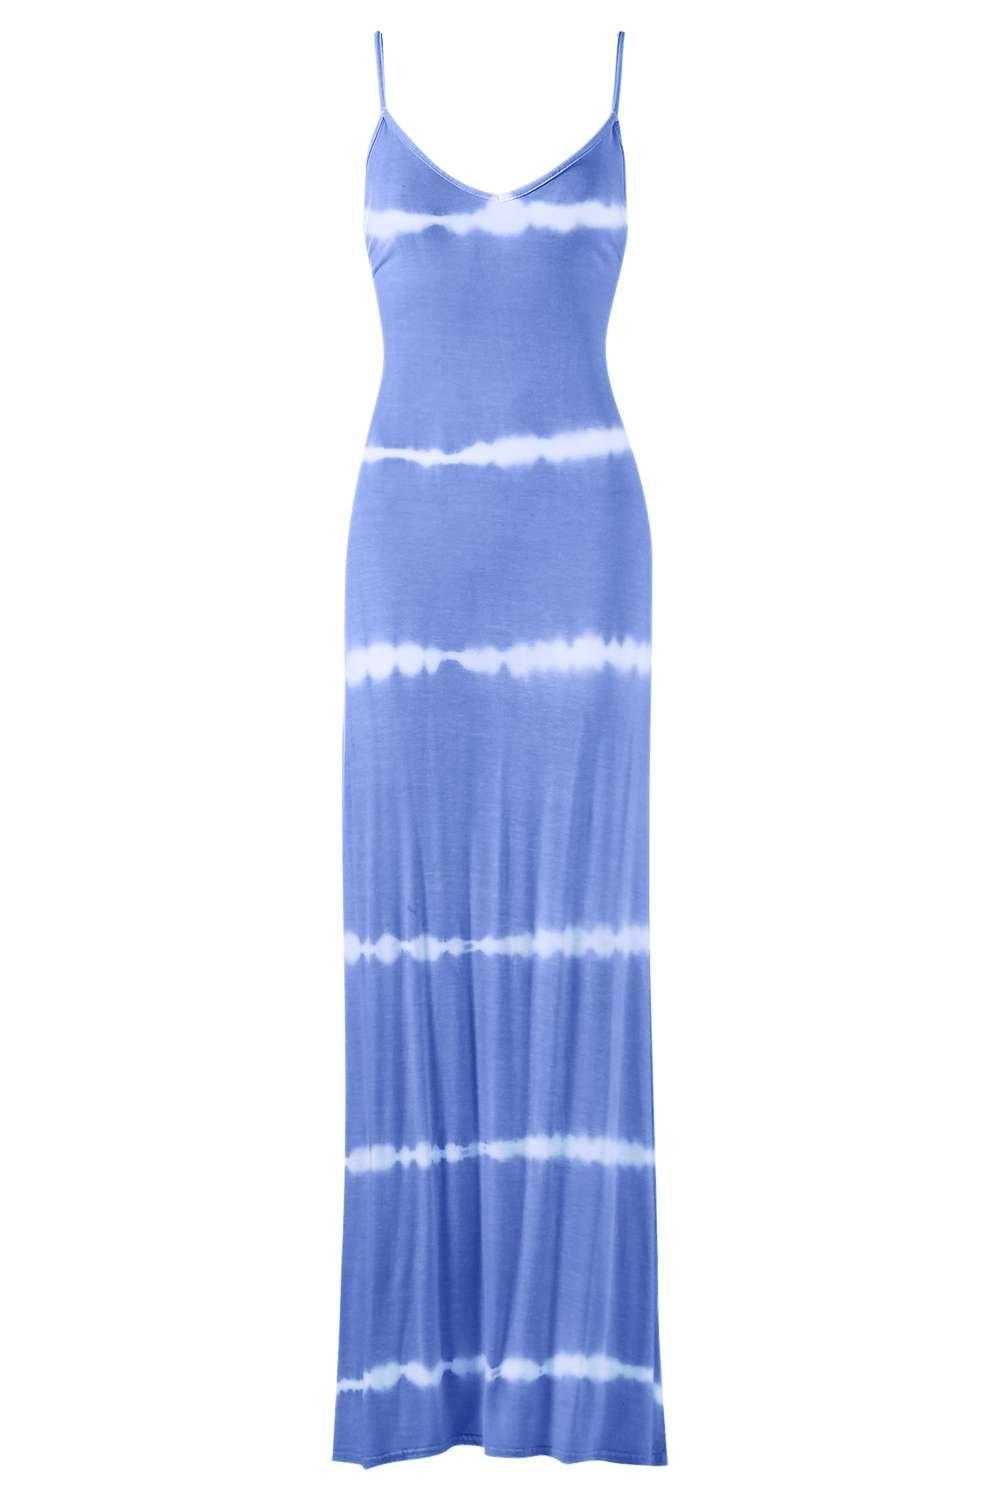 Boohoo Womens Claire Tie Dye Strappy Back Maxi Dress